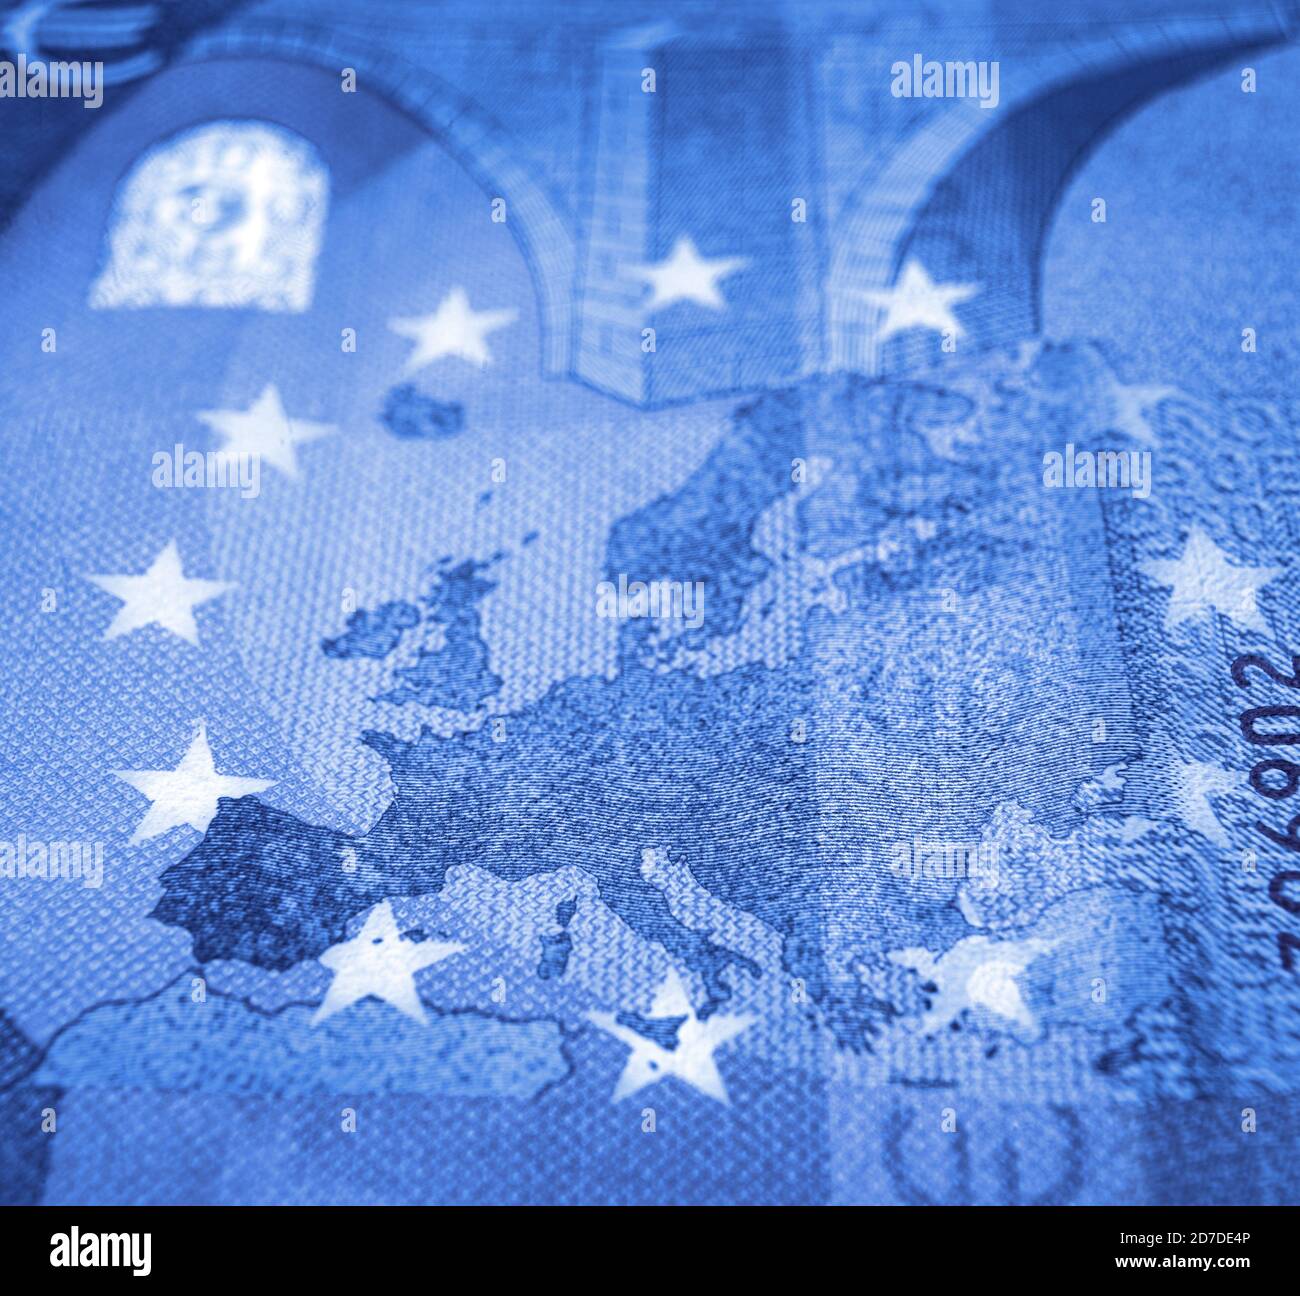 Shallow focus against euro banknote focused on europe map in blue tone Stock Photo